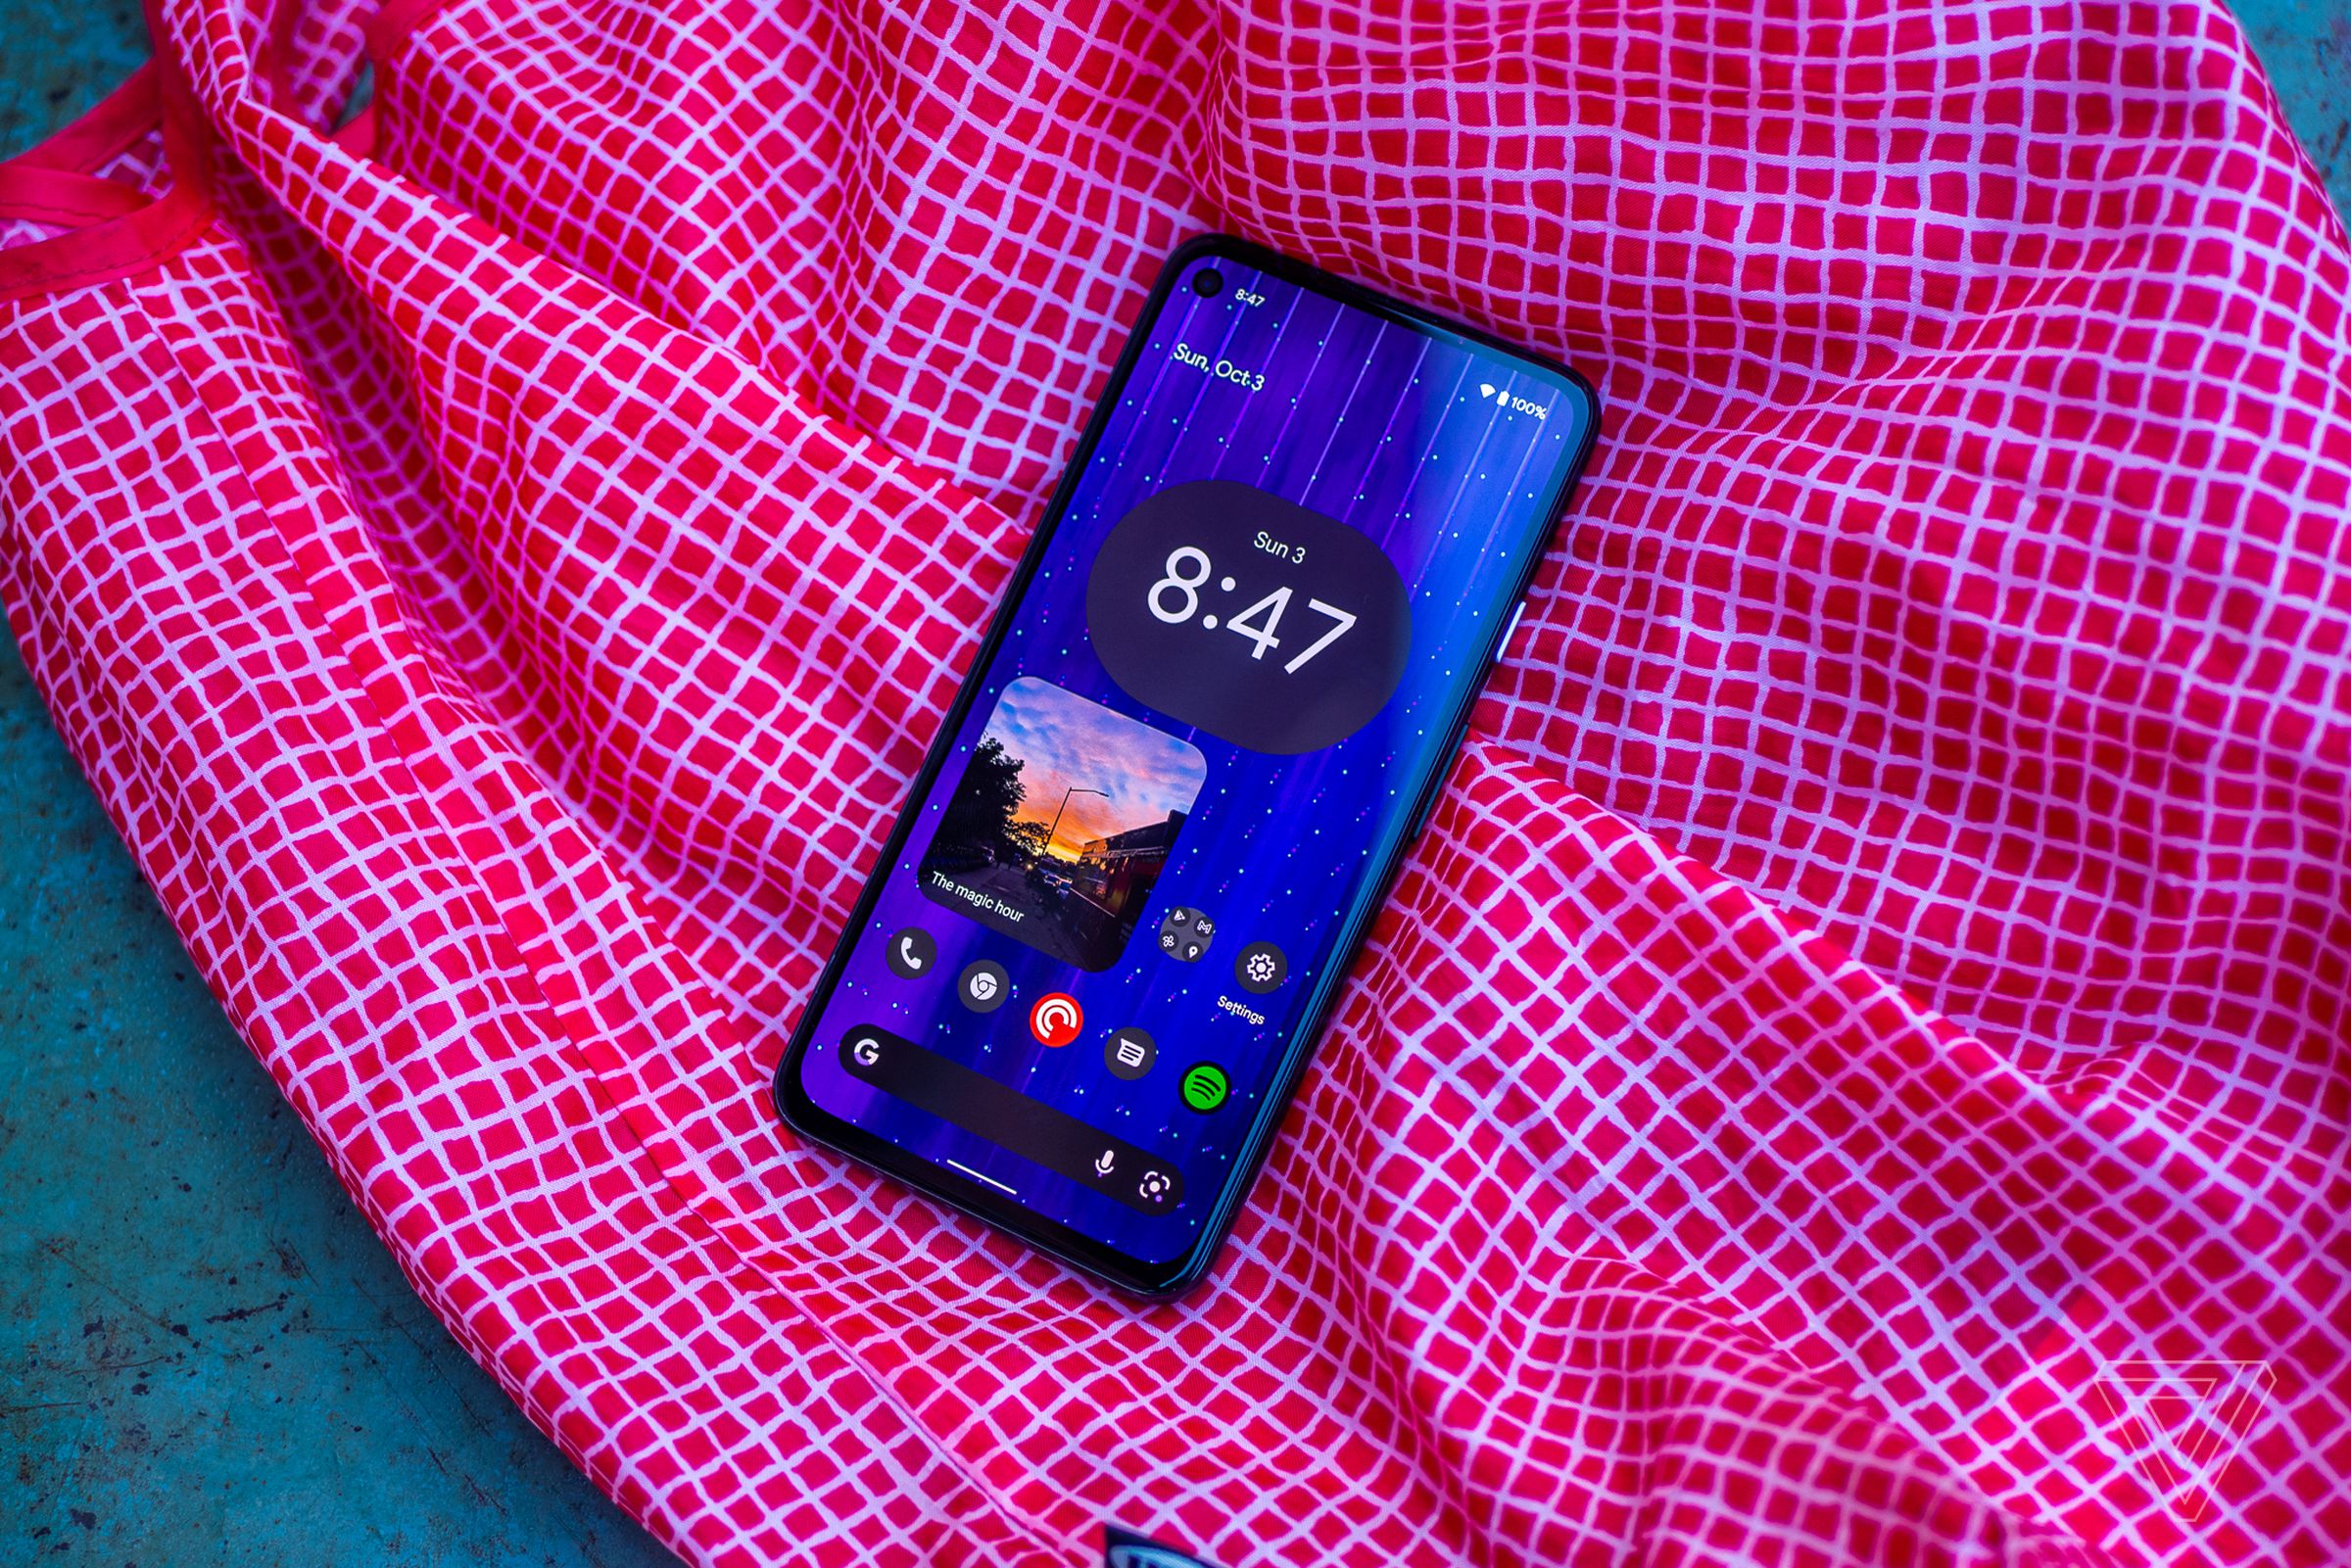 Android 12 beta running on a Pixel 4A 5G